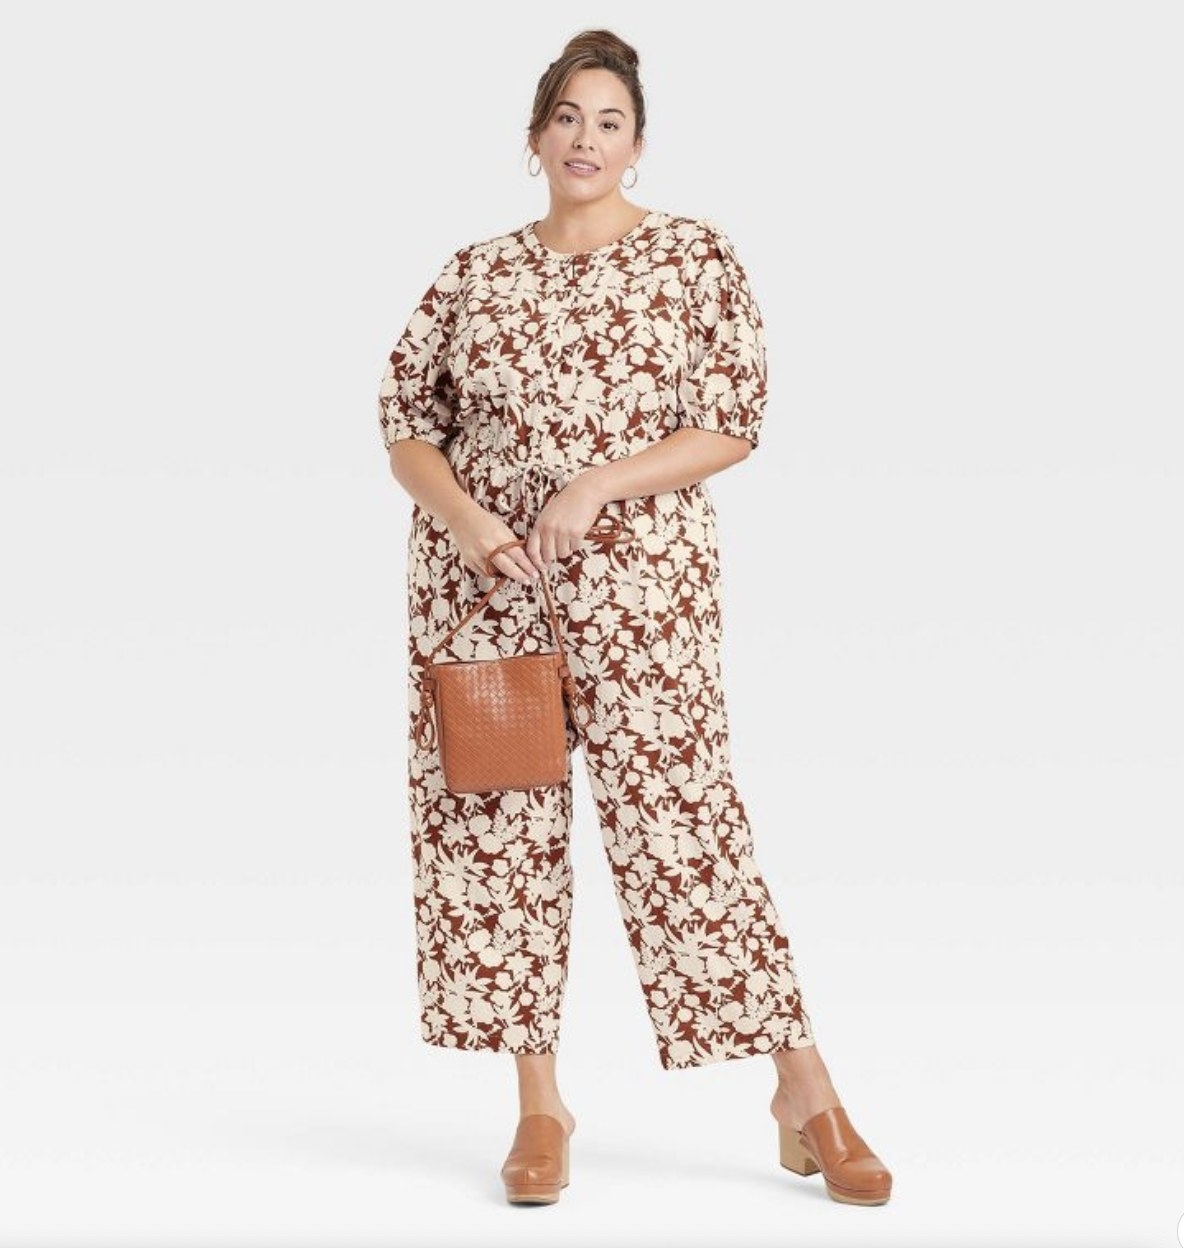 A brown and white jumpsuit